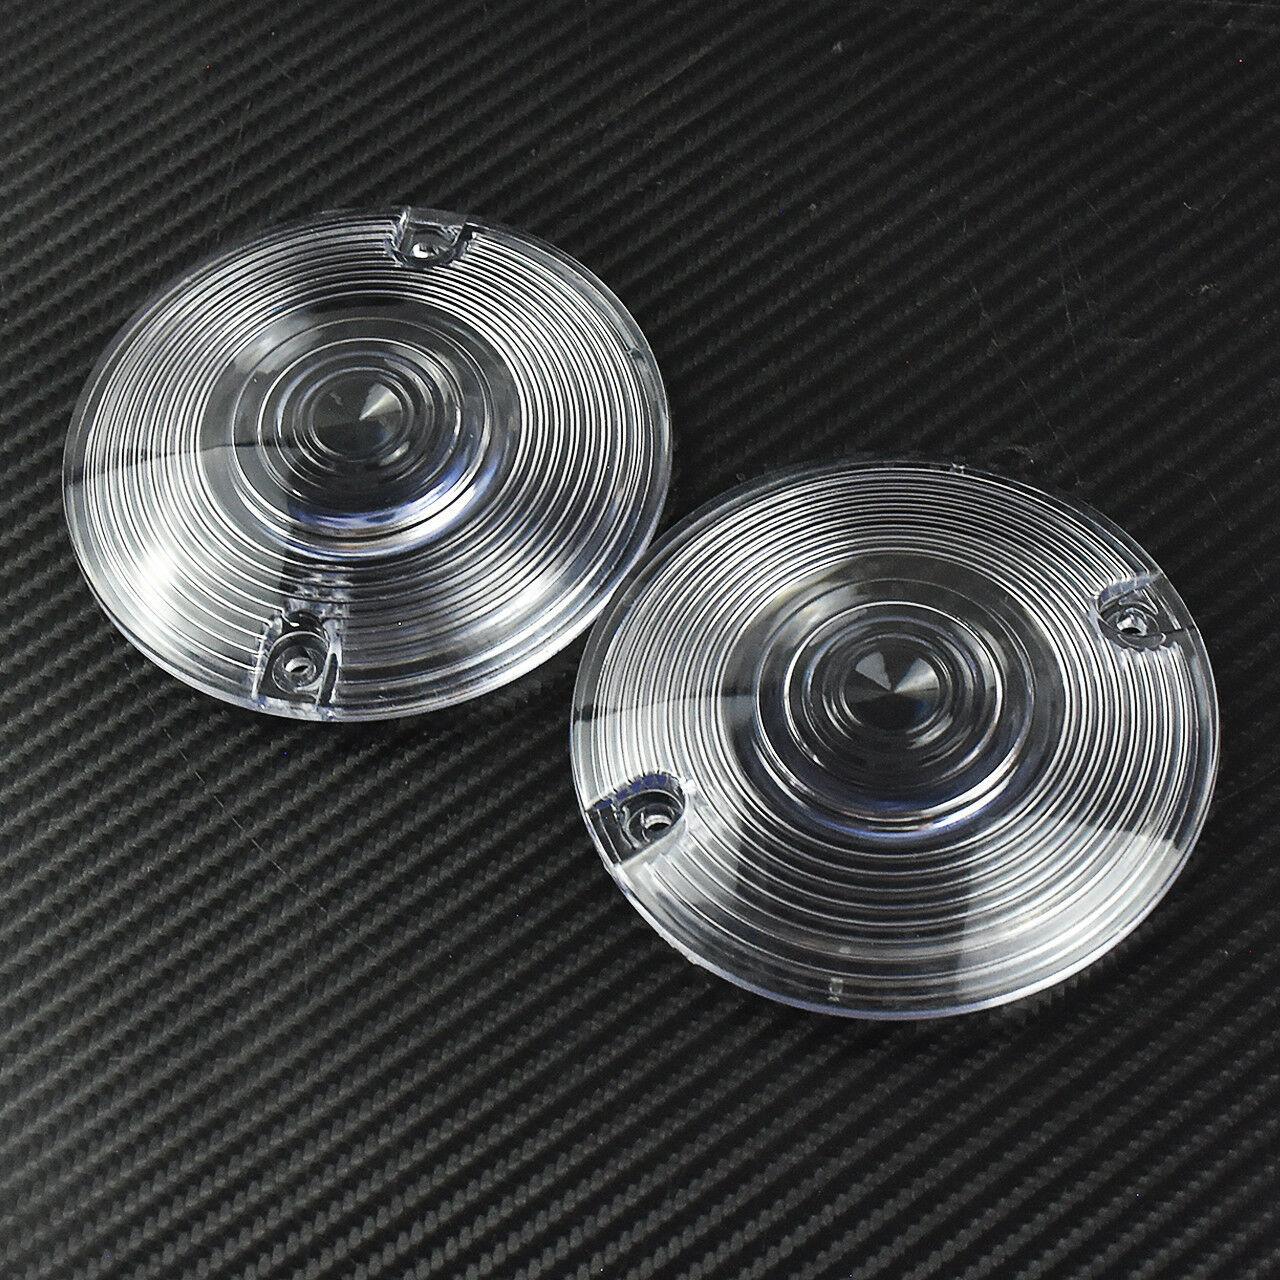 1 Pair Turn Signal Lens Clear Cover Fit For Harley Touring FLTR FLTC Softail - Moto Life Products